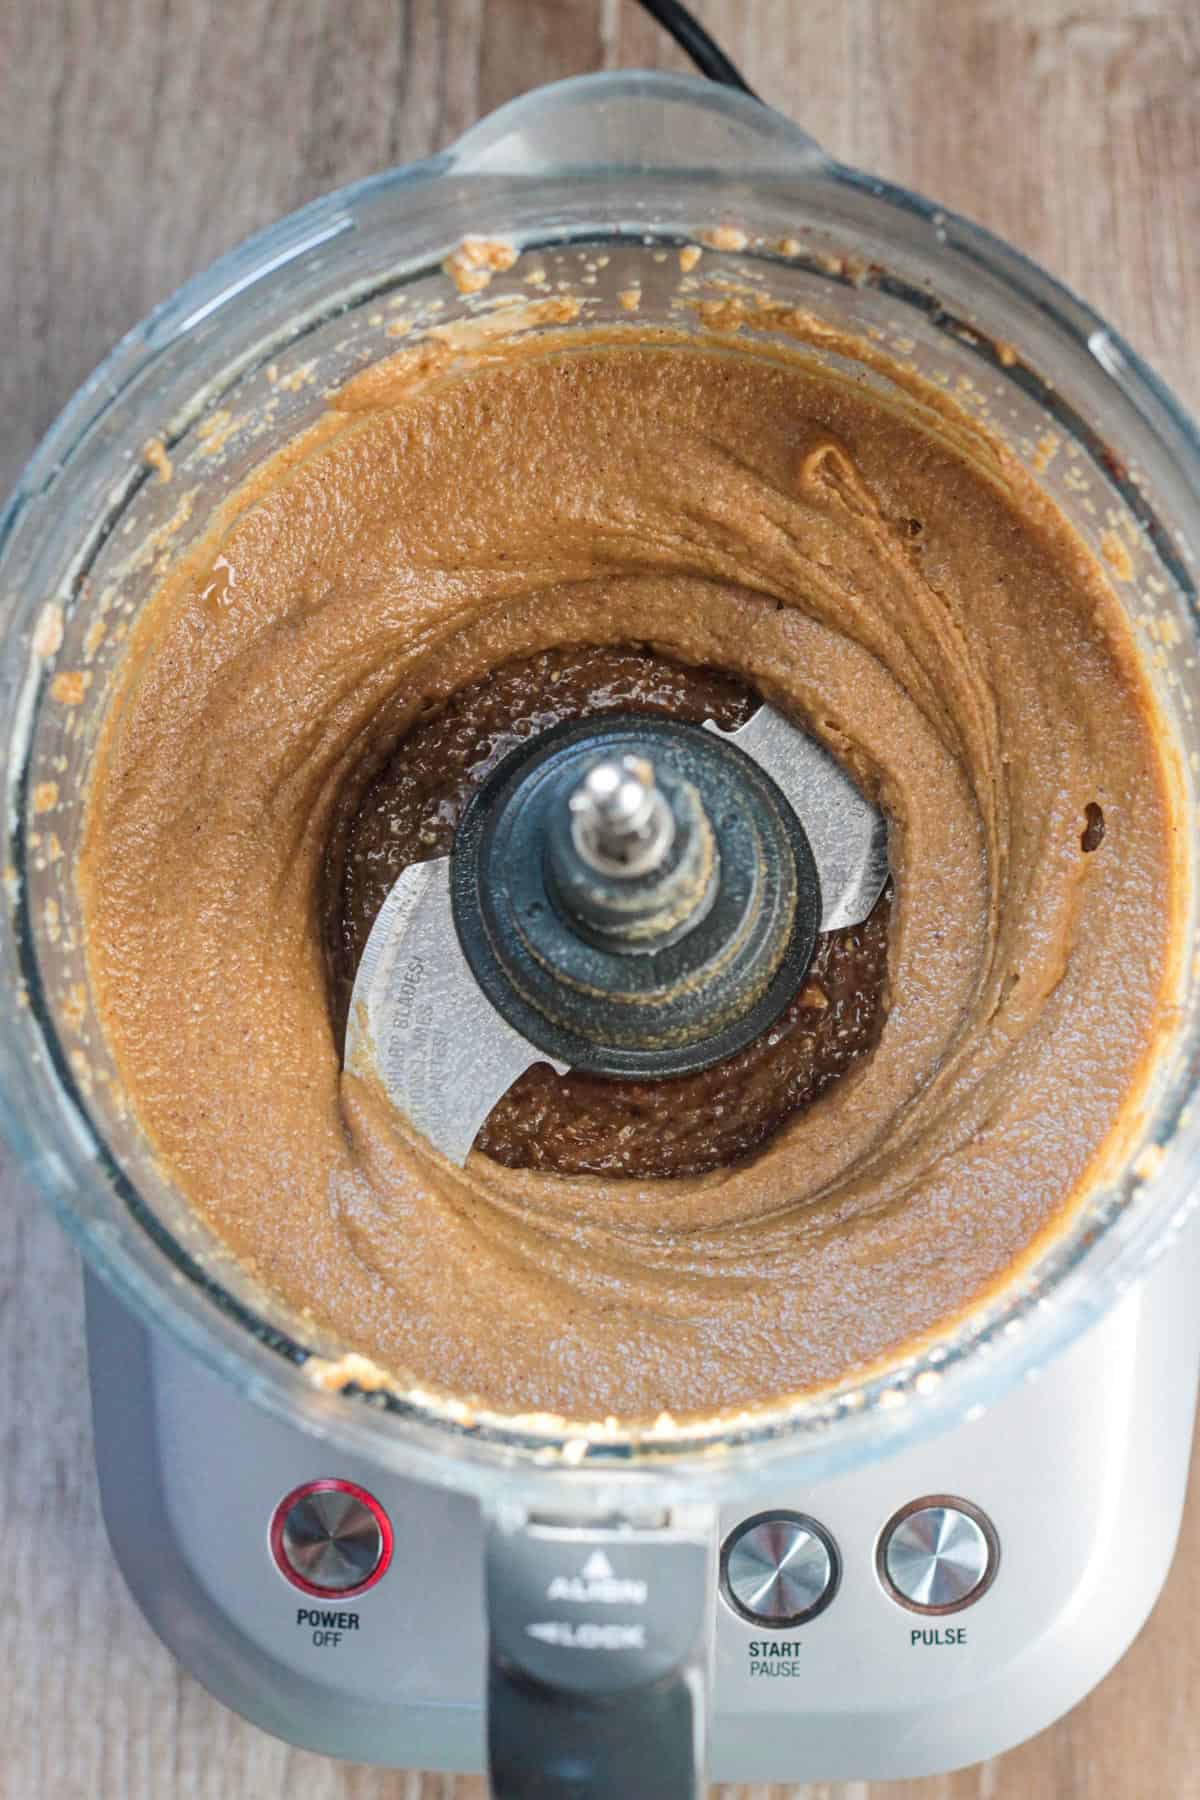 Ingredients puréed and smooth in a food processor.